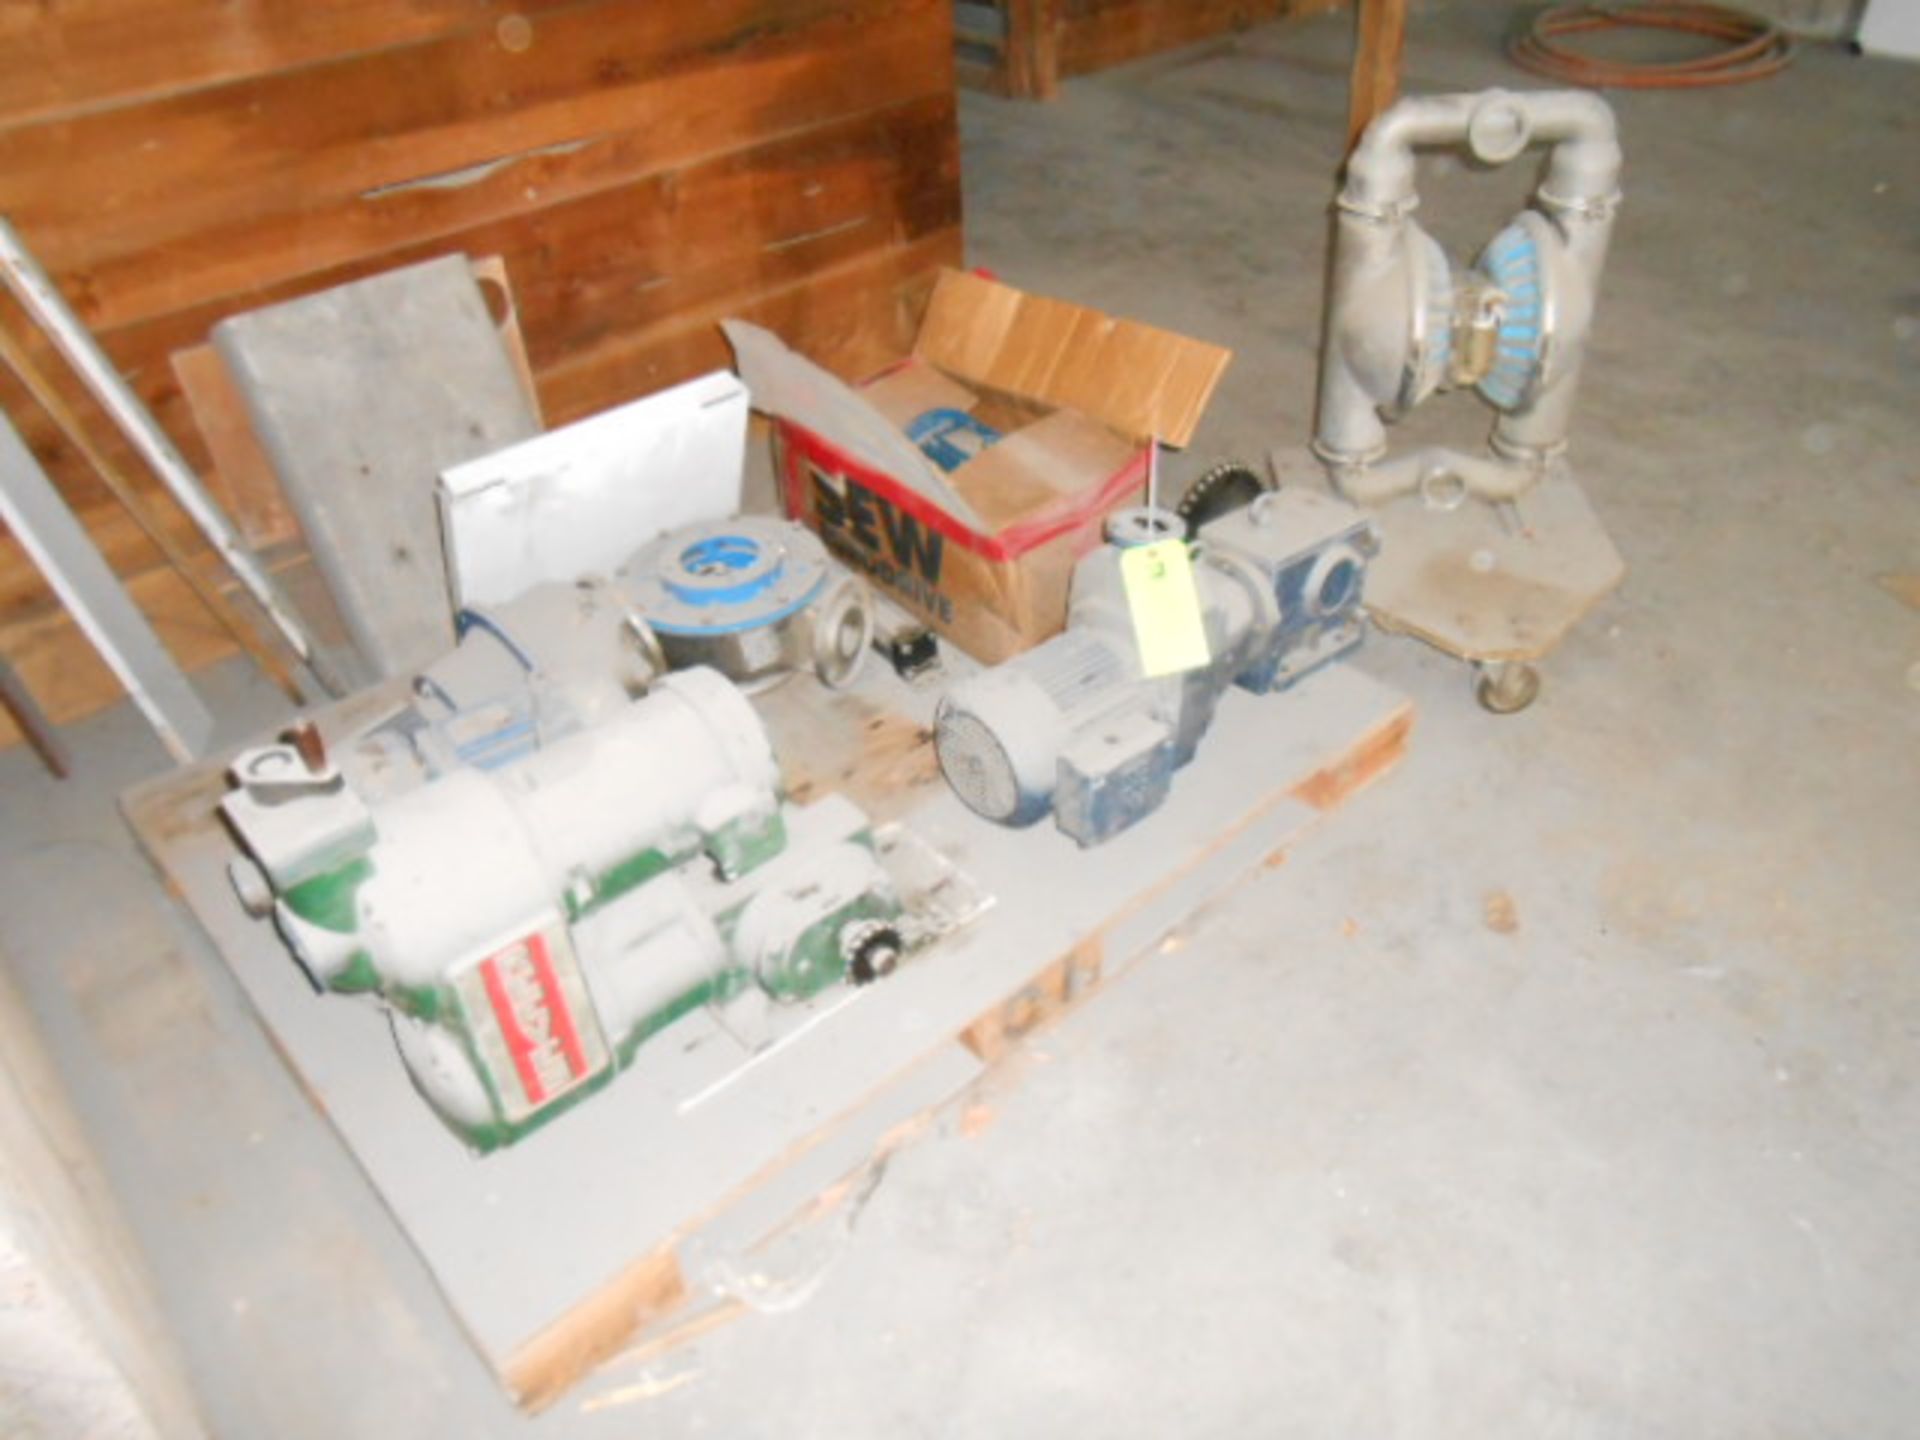 LOT of pallet 2 pumps, 2 gearbox, 1 air pump, pump housing, 1 C-face motor __LOCATED: ON-SITE